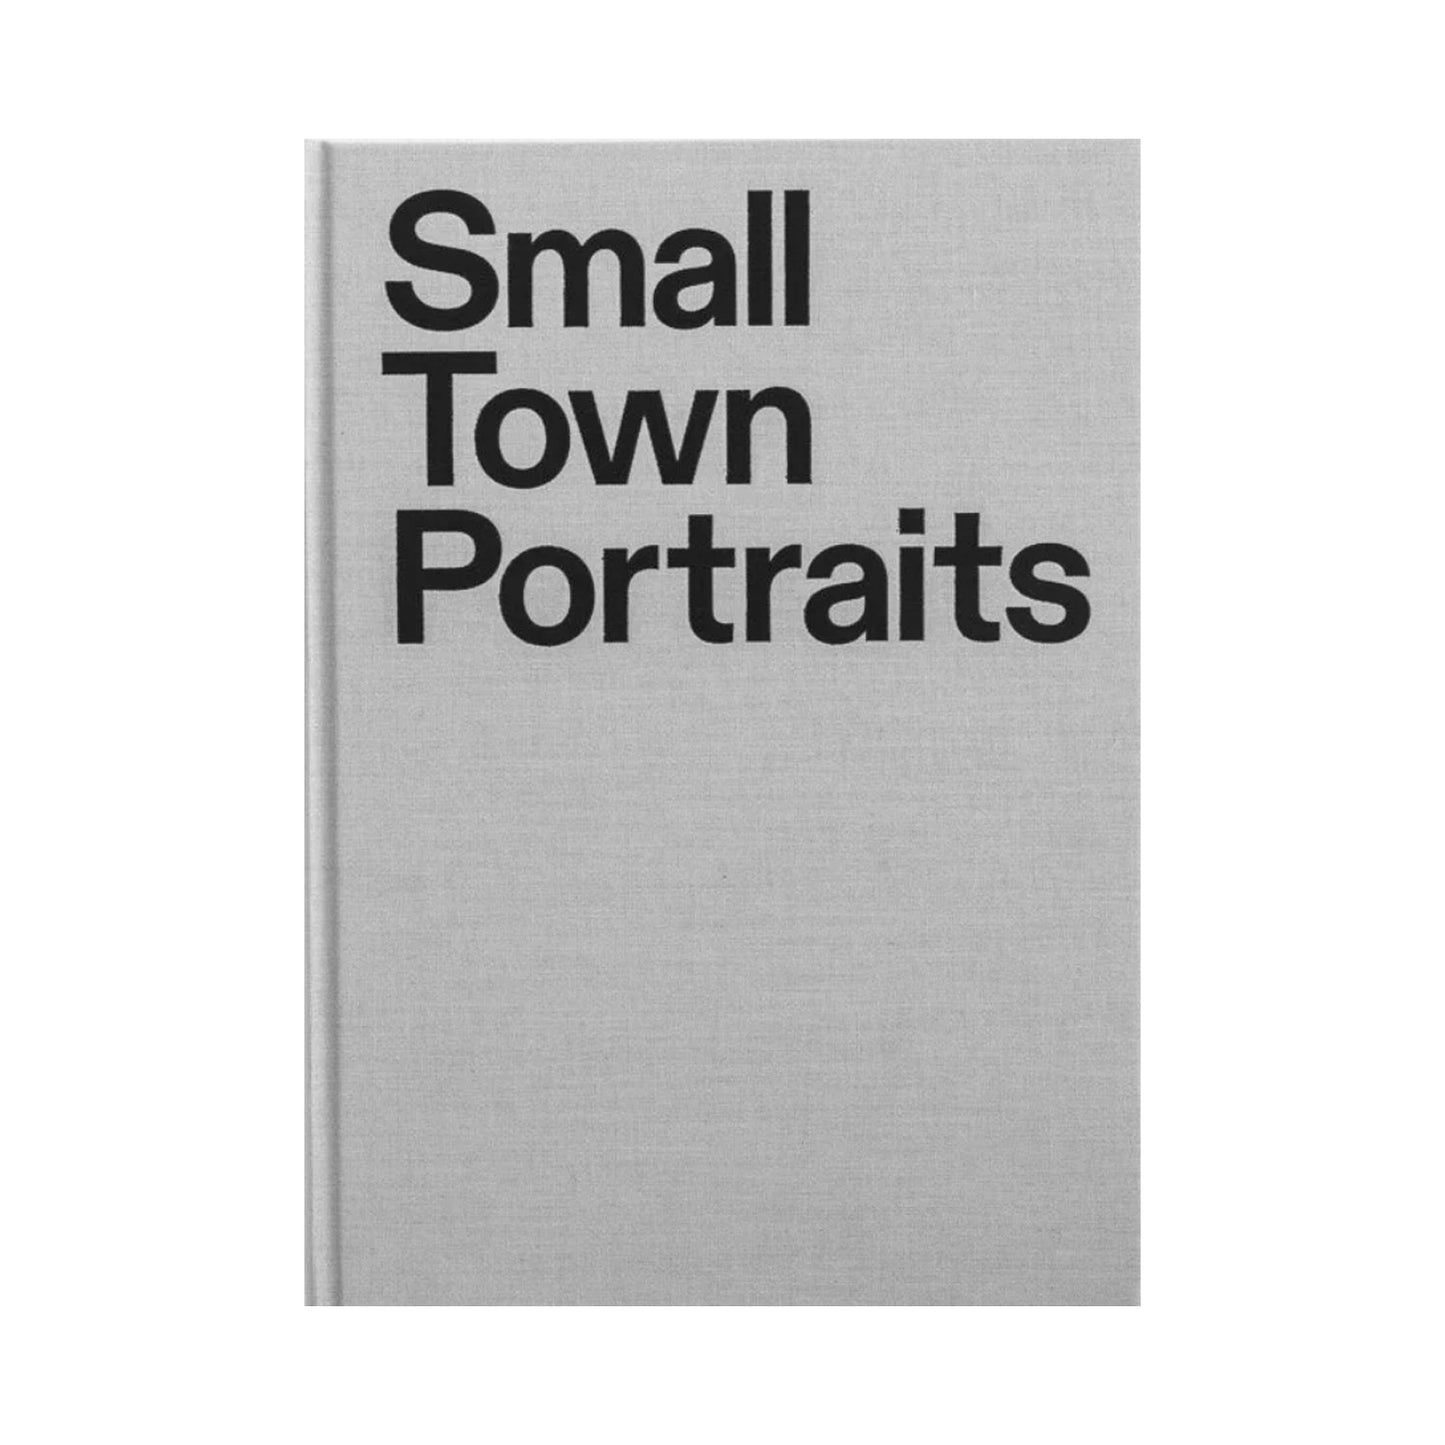 Small Town Portraits by Dennis Dinneen